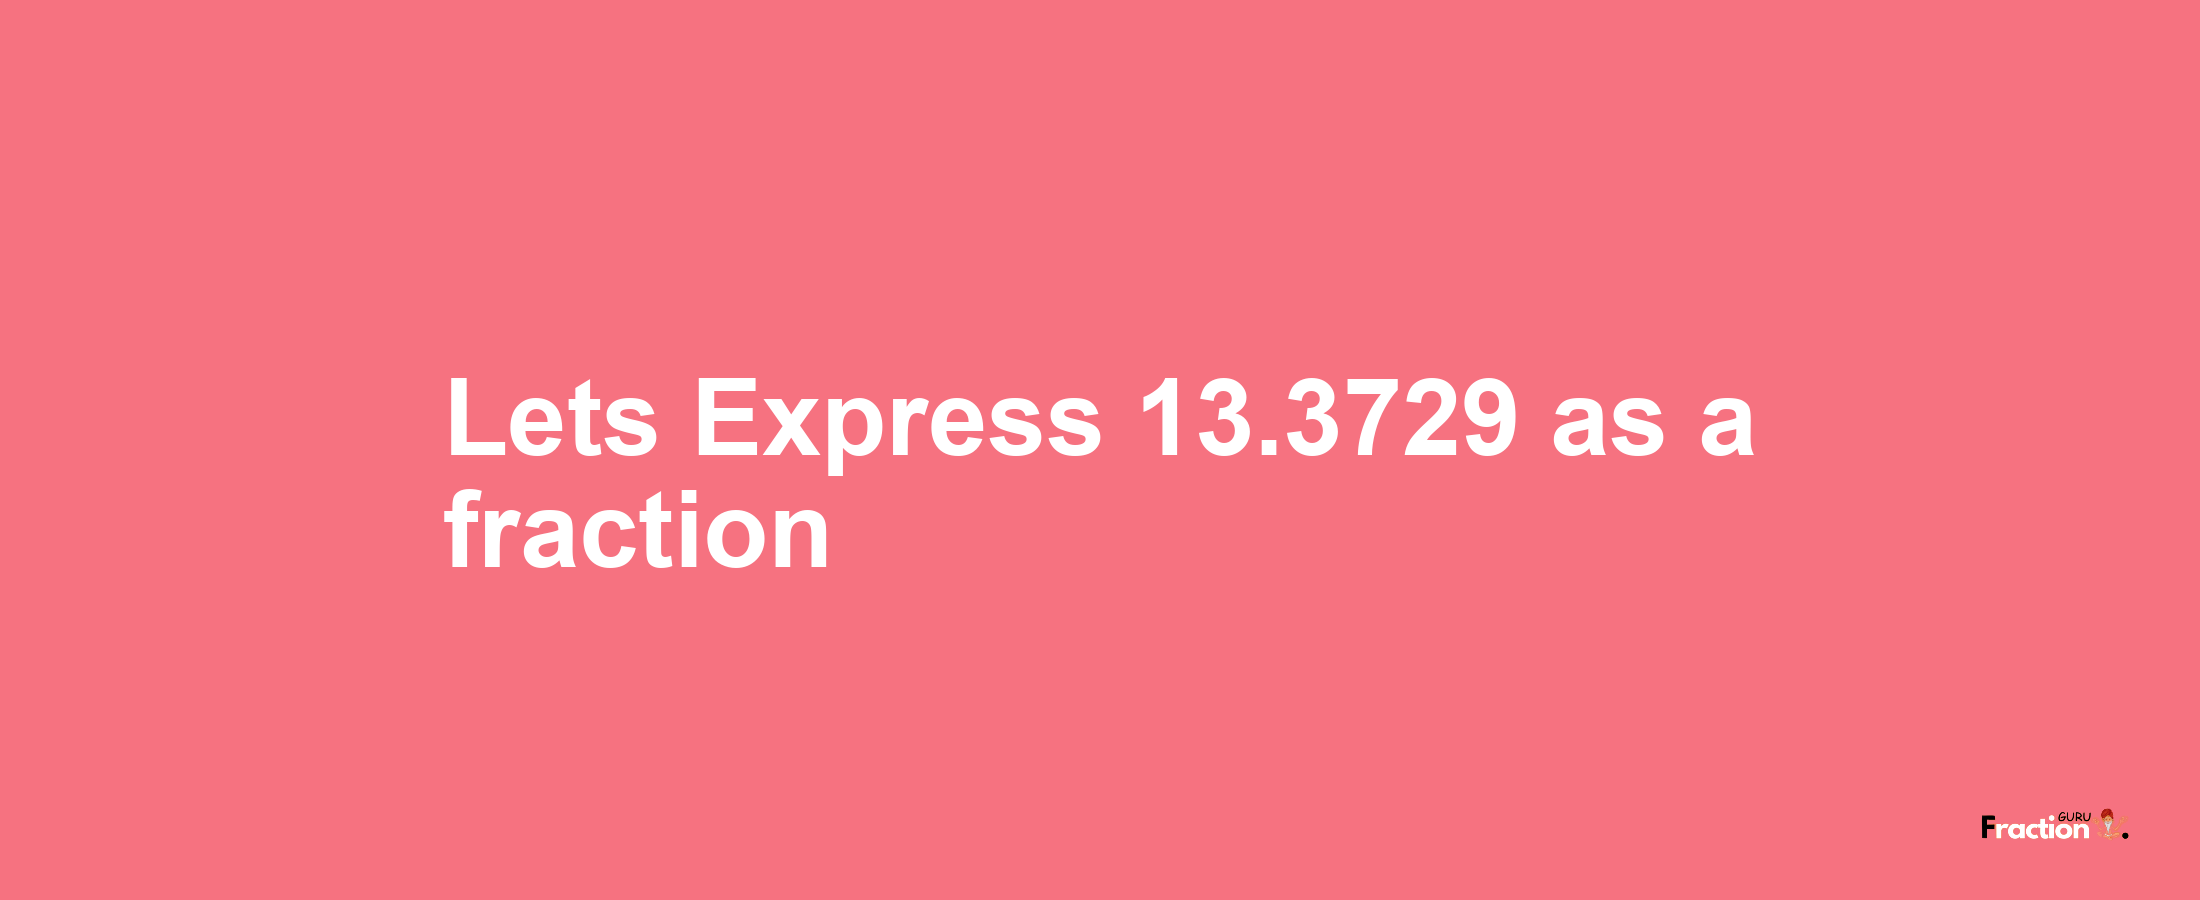 Lets Express 13.3729 as afraction